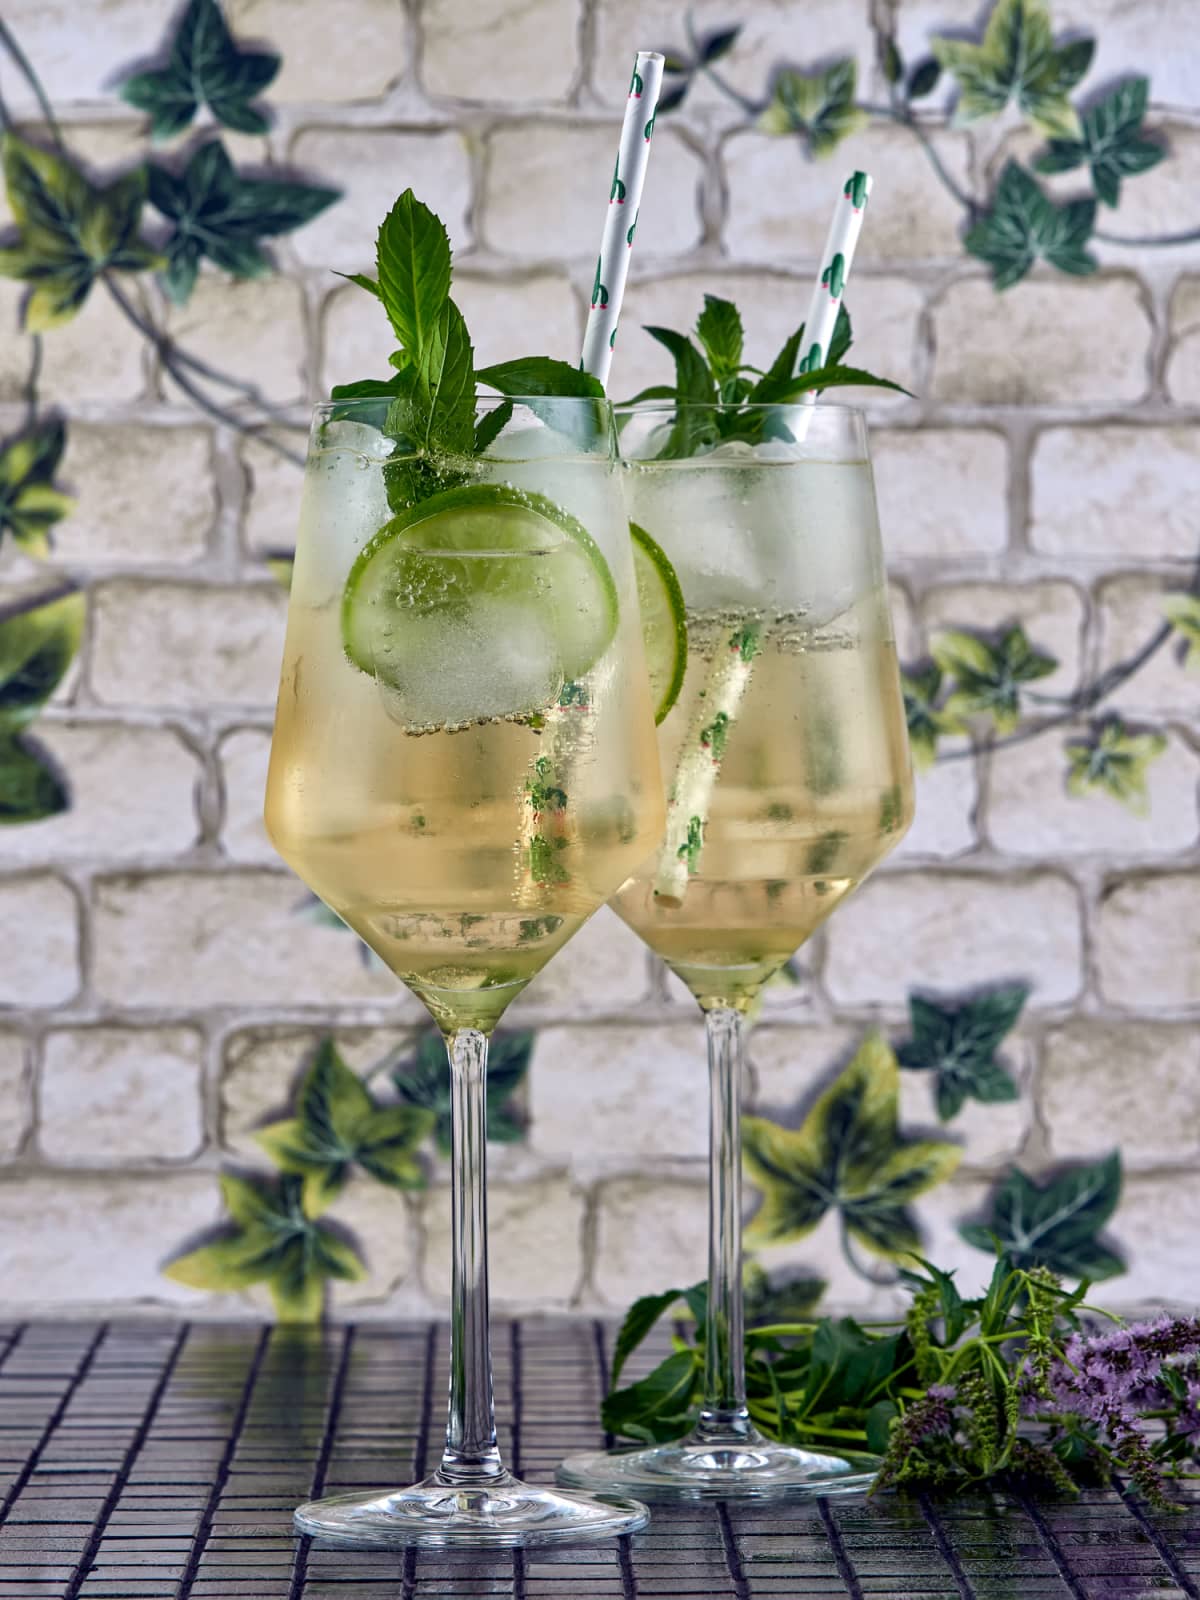 Two glasses of Hugo spritz with lime and mint garnishes